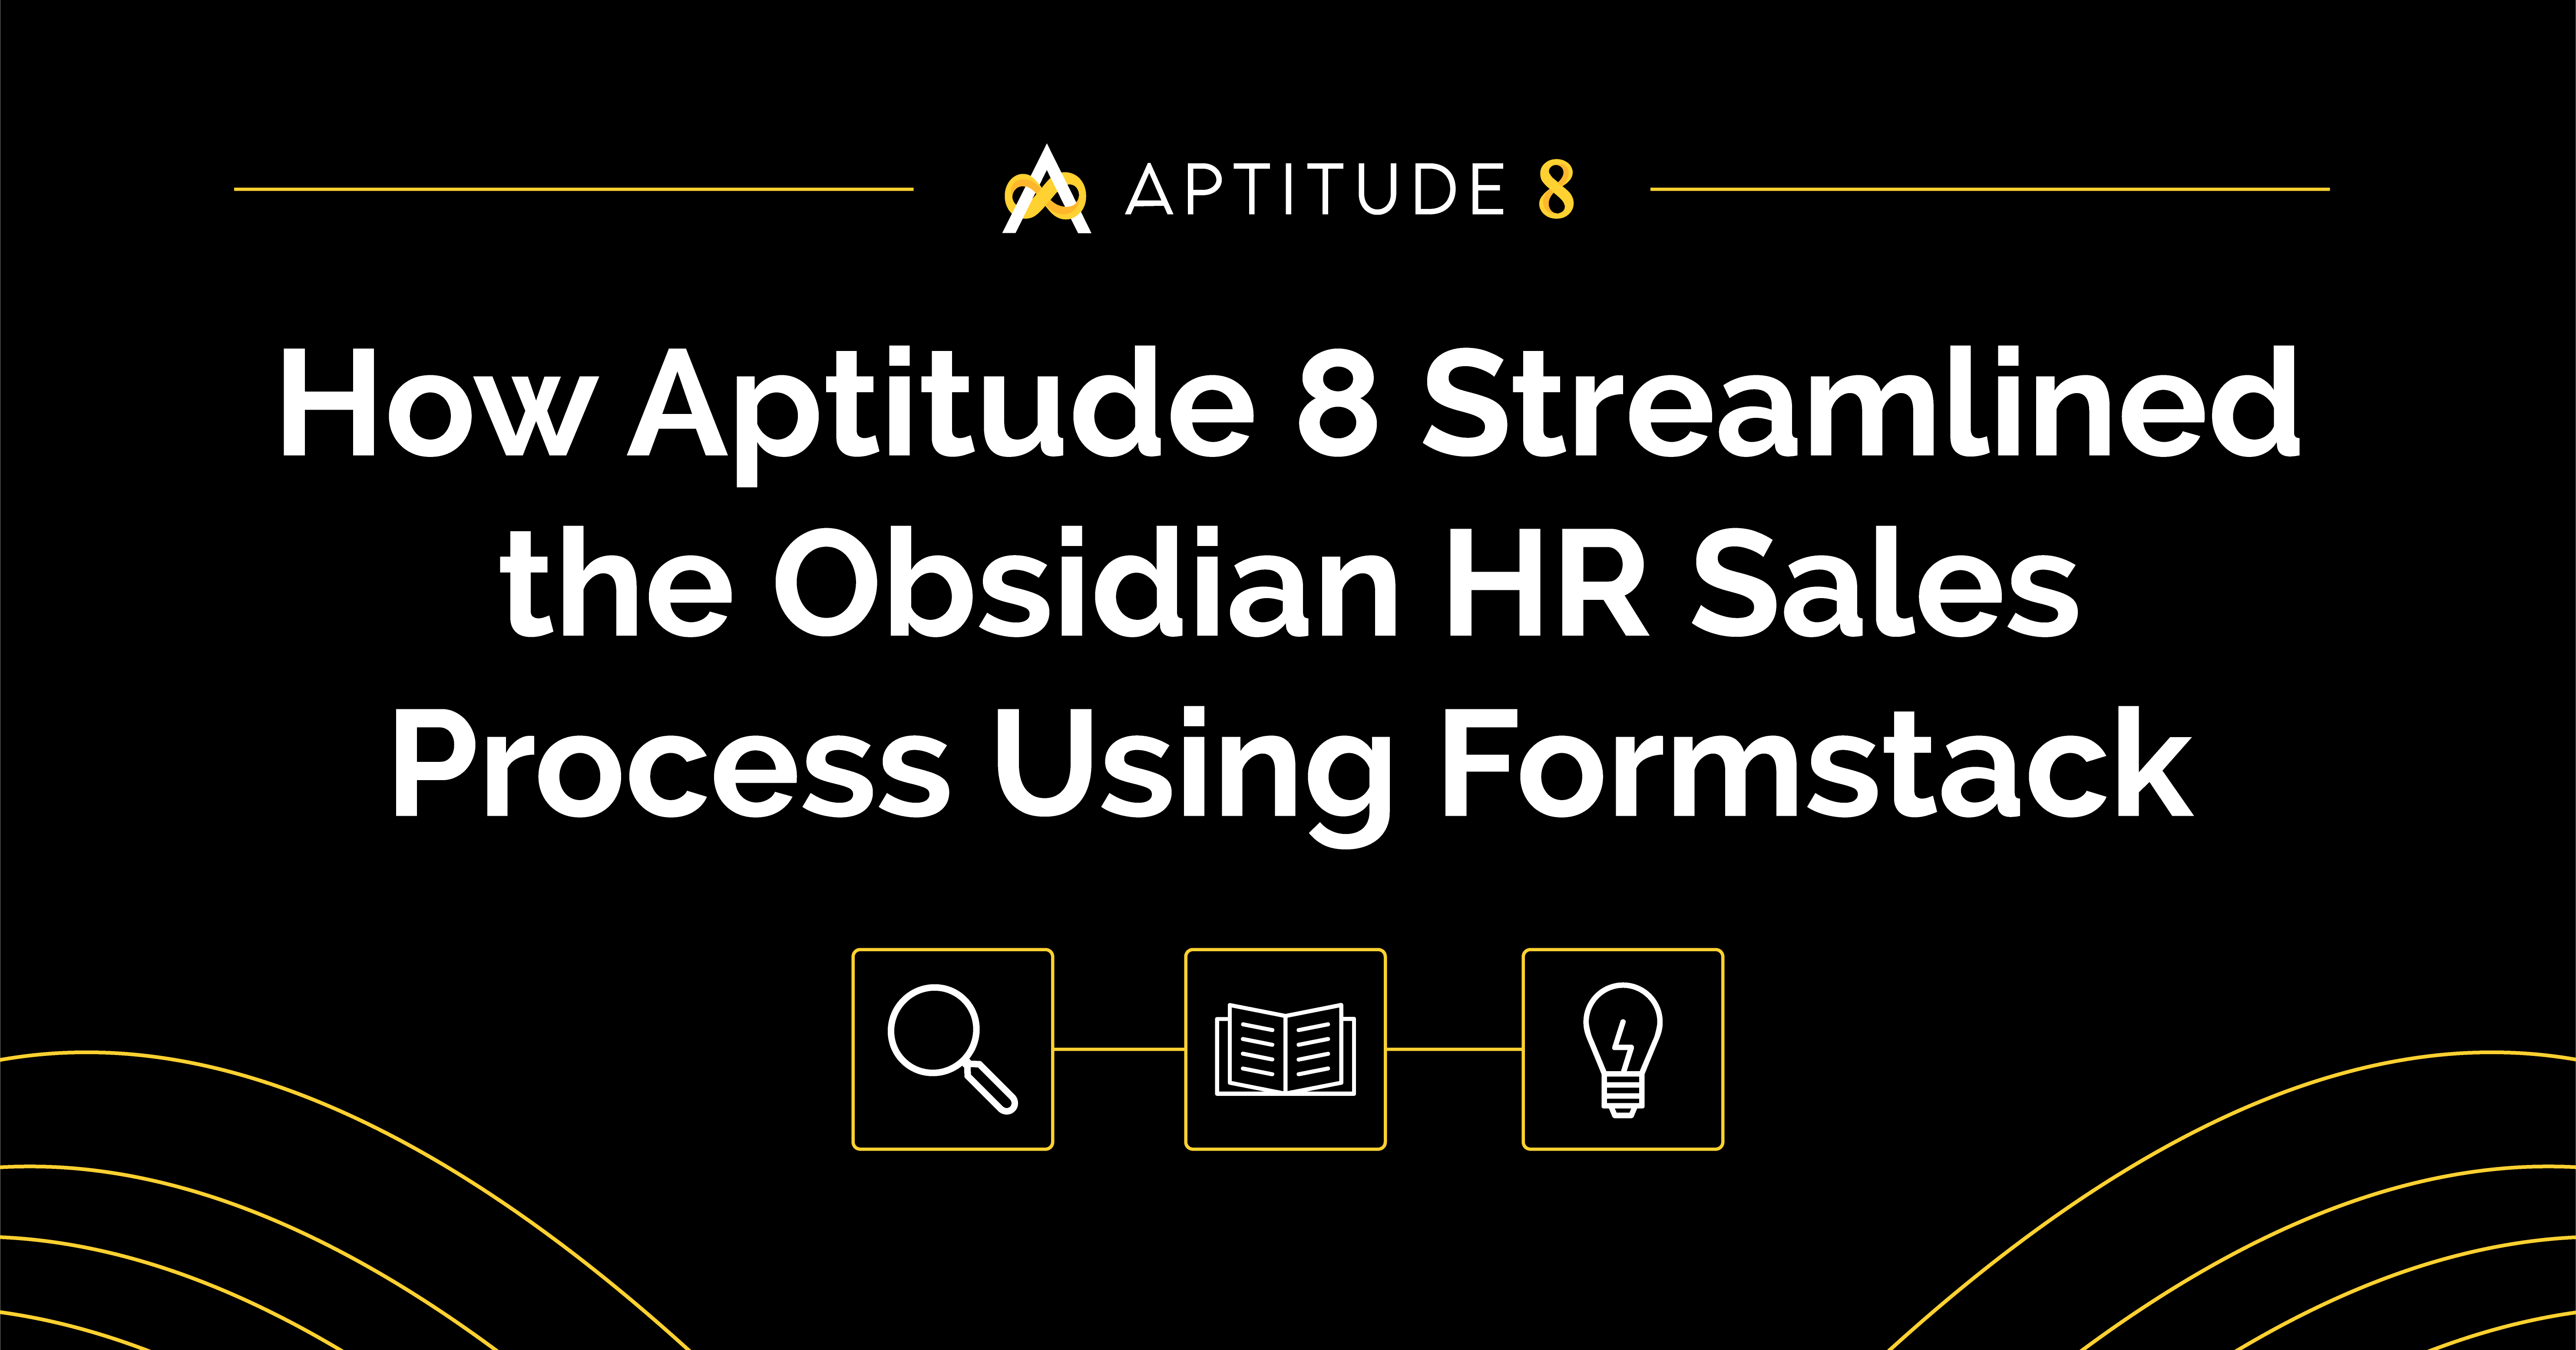 How Aptitude 8 Streamlined the Obsidian HR Sales Process Using Formstack